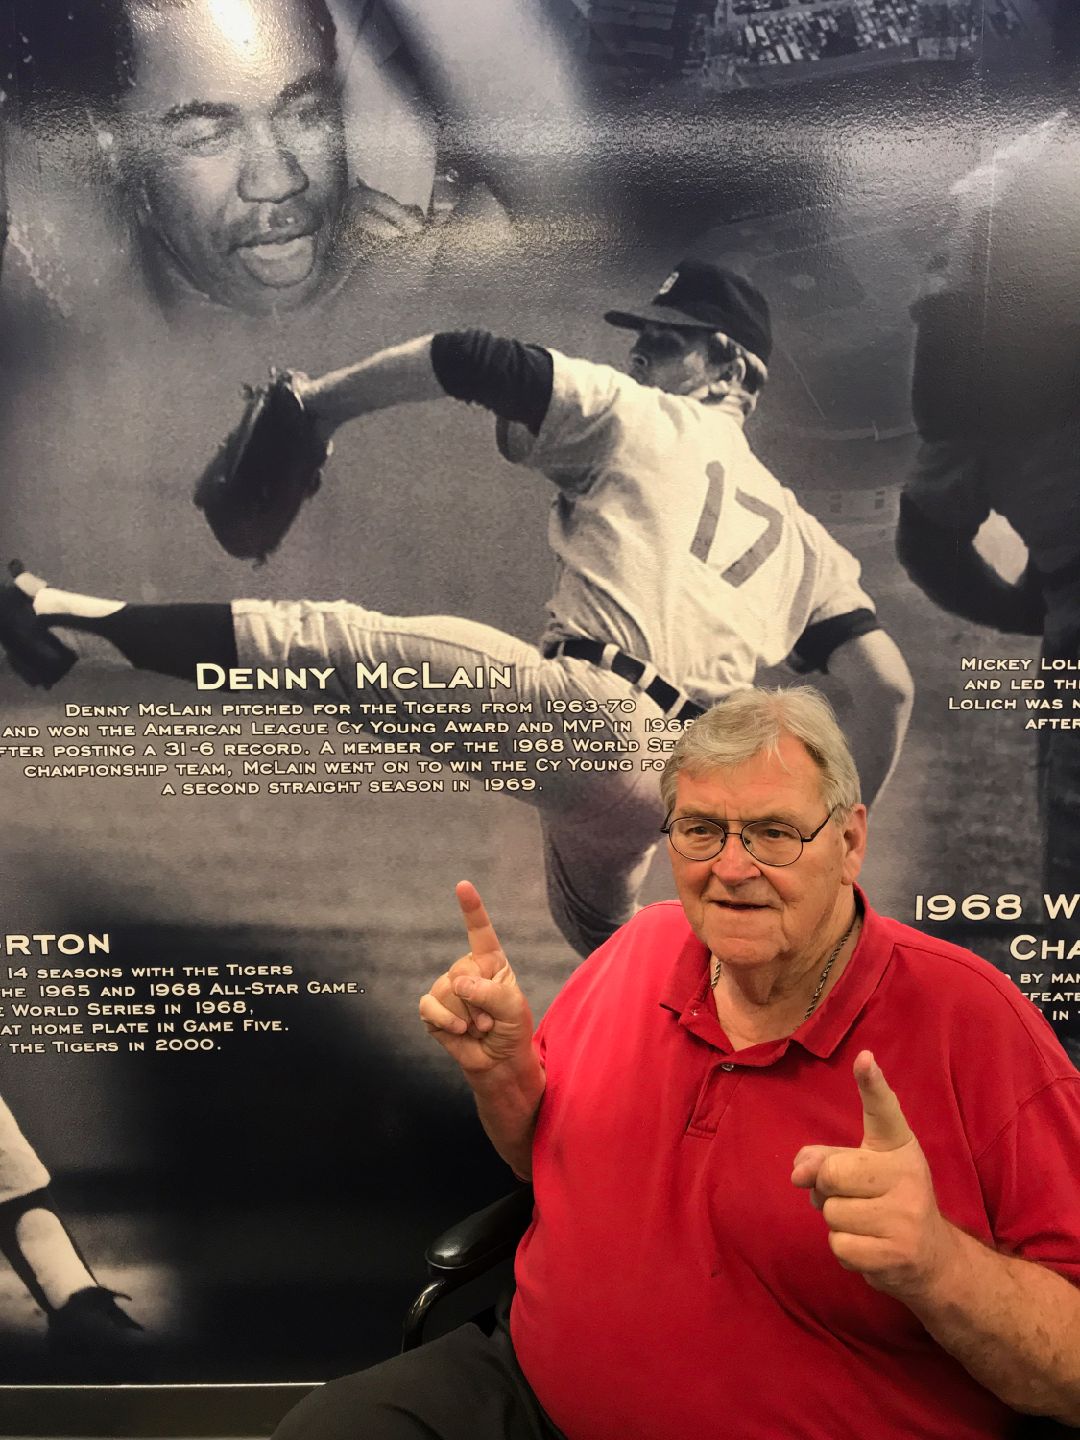 Denny McLain, 30 game winner, 2 time Cy Young, American League MVP